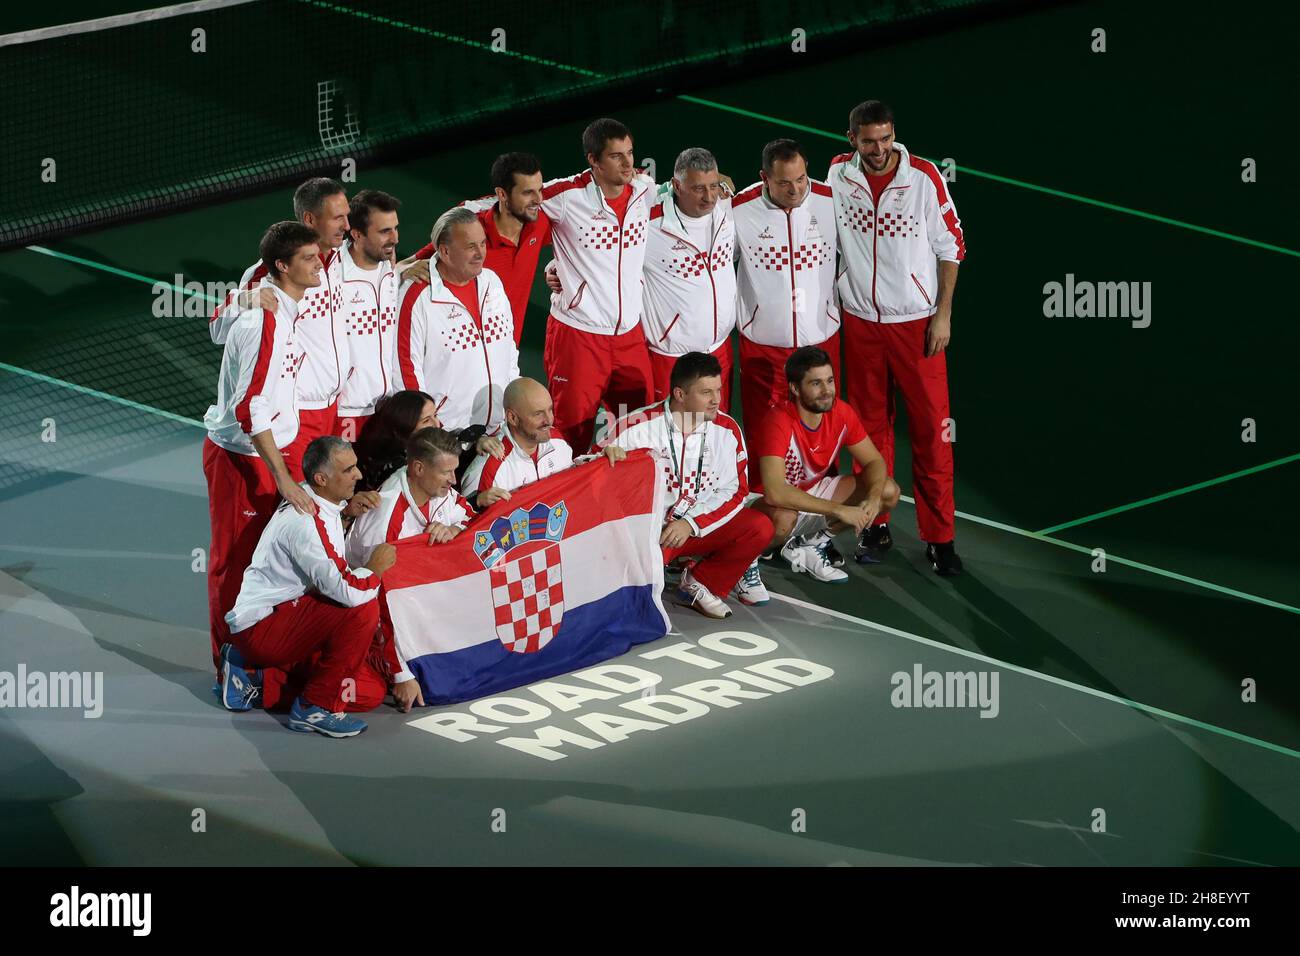 Turin, Italy, 29th November 2021. The Croatia team pose for a photo  following the quarter final doubles victory of Mate Pavic and Nikola Metic  over Fabio Fognini and Jannik Sinner of Italy